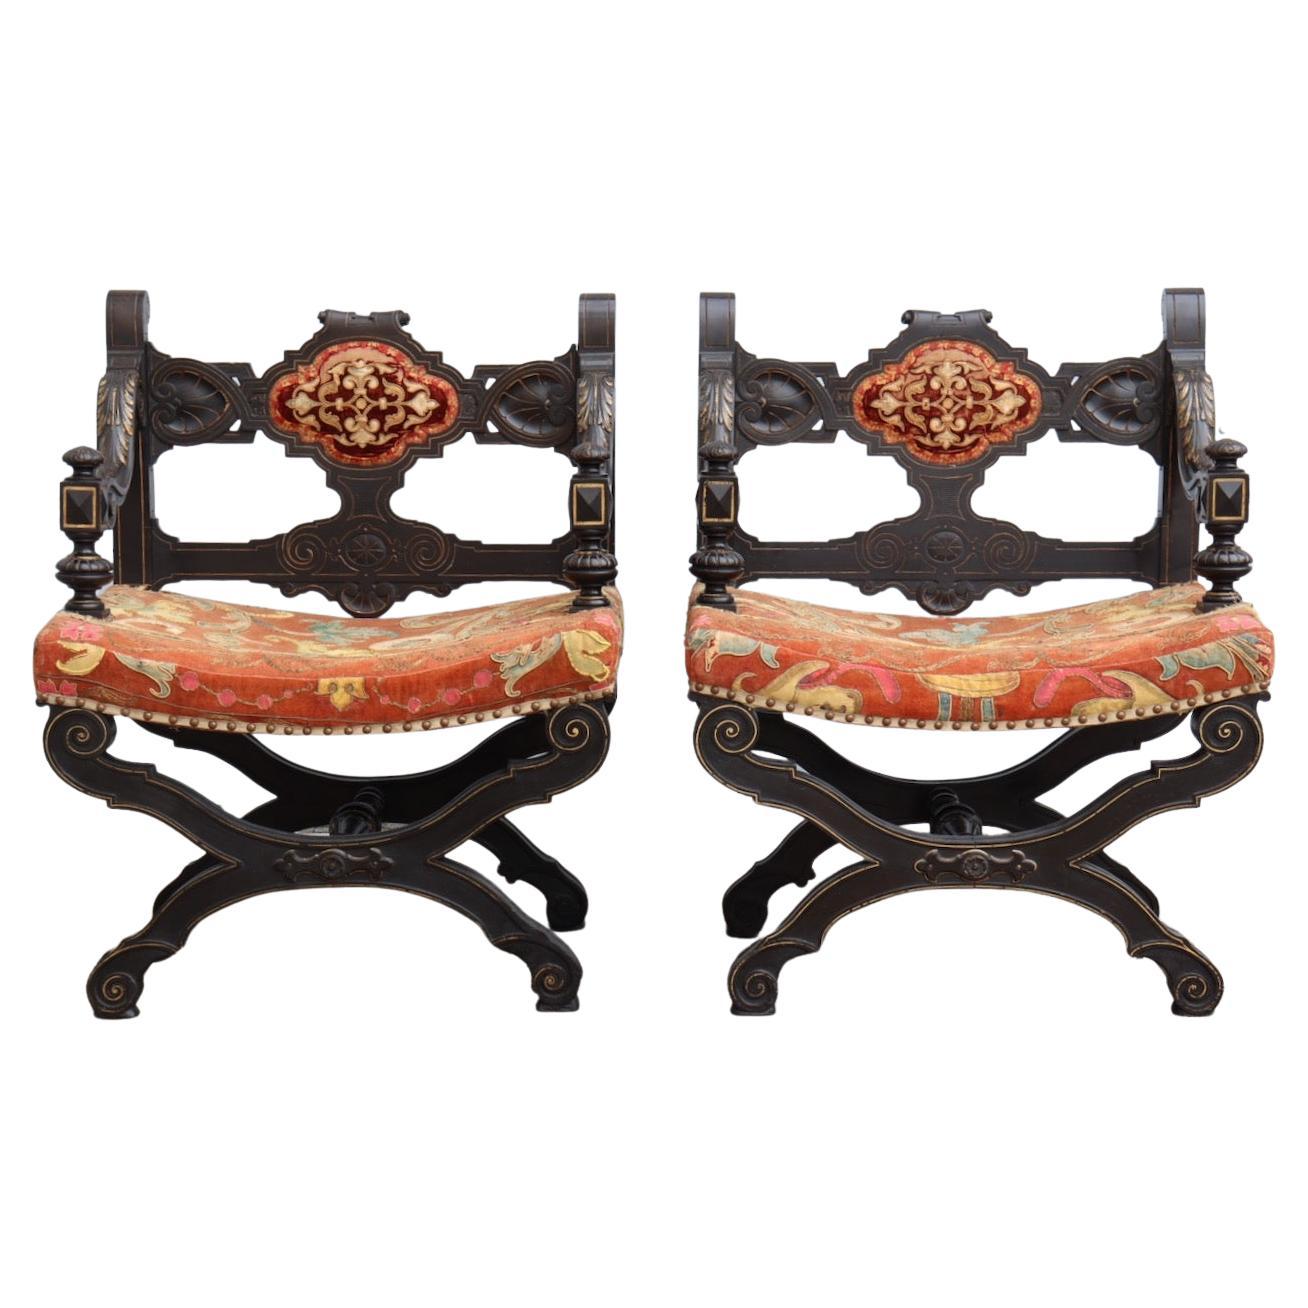 Pair of French Napoléon III Curule Armchairs
Moulded, carved, blackened wood, enhanced with gold. 
Open-banded back decorated with interlacing, X-base joined by an entretoise.
Older Polychrome trim embroidered with floral interlacing.
Circa